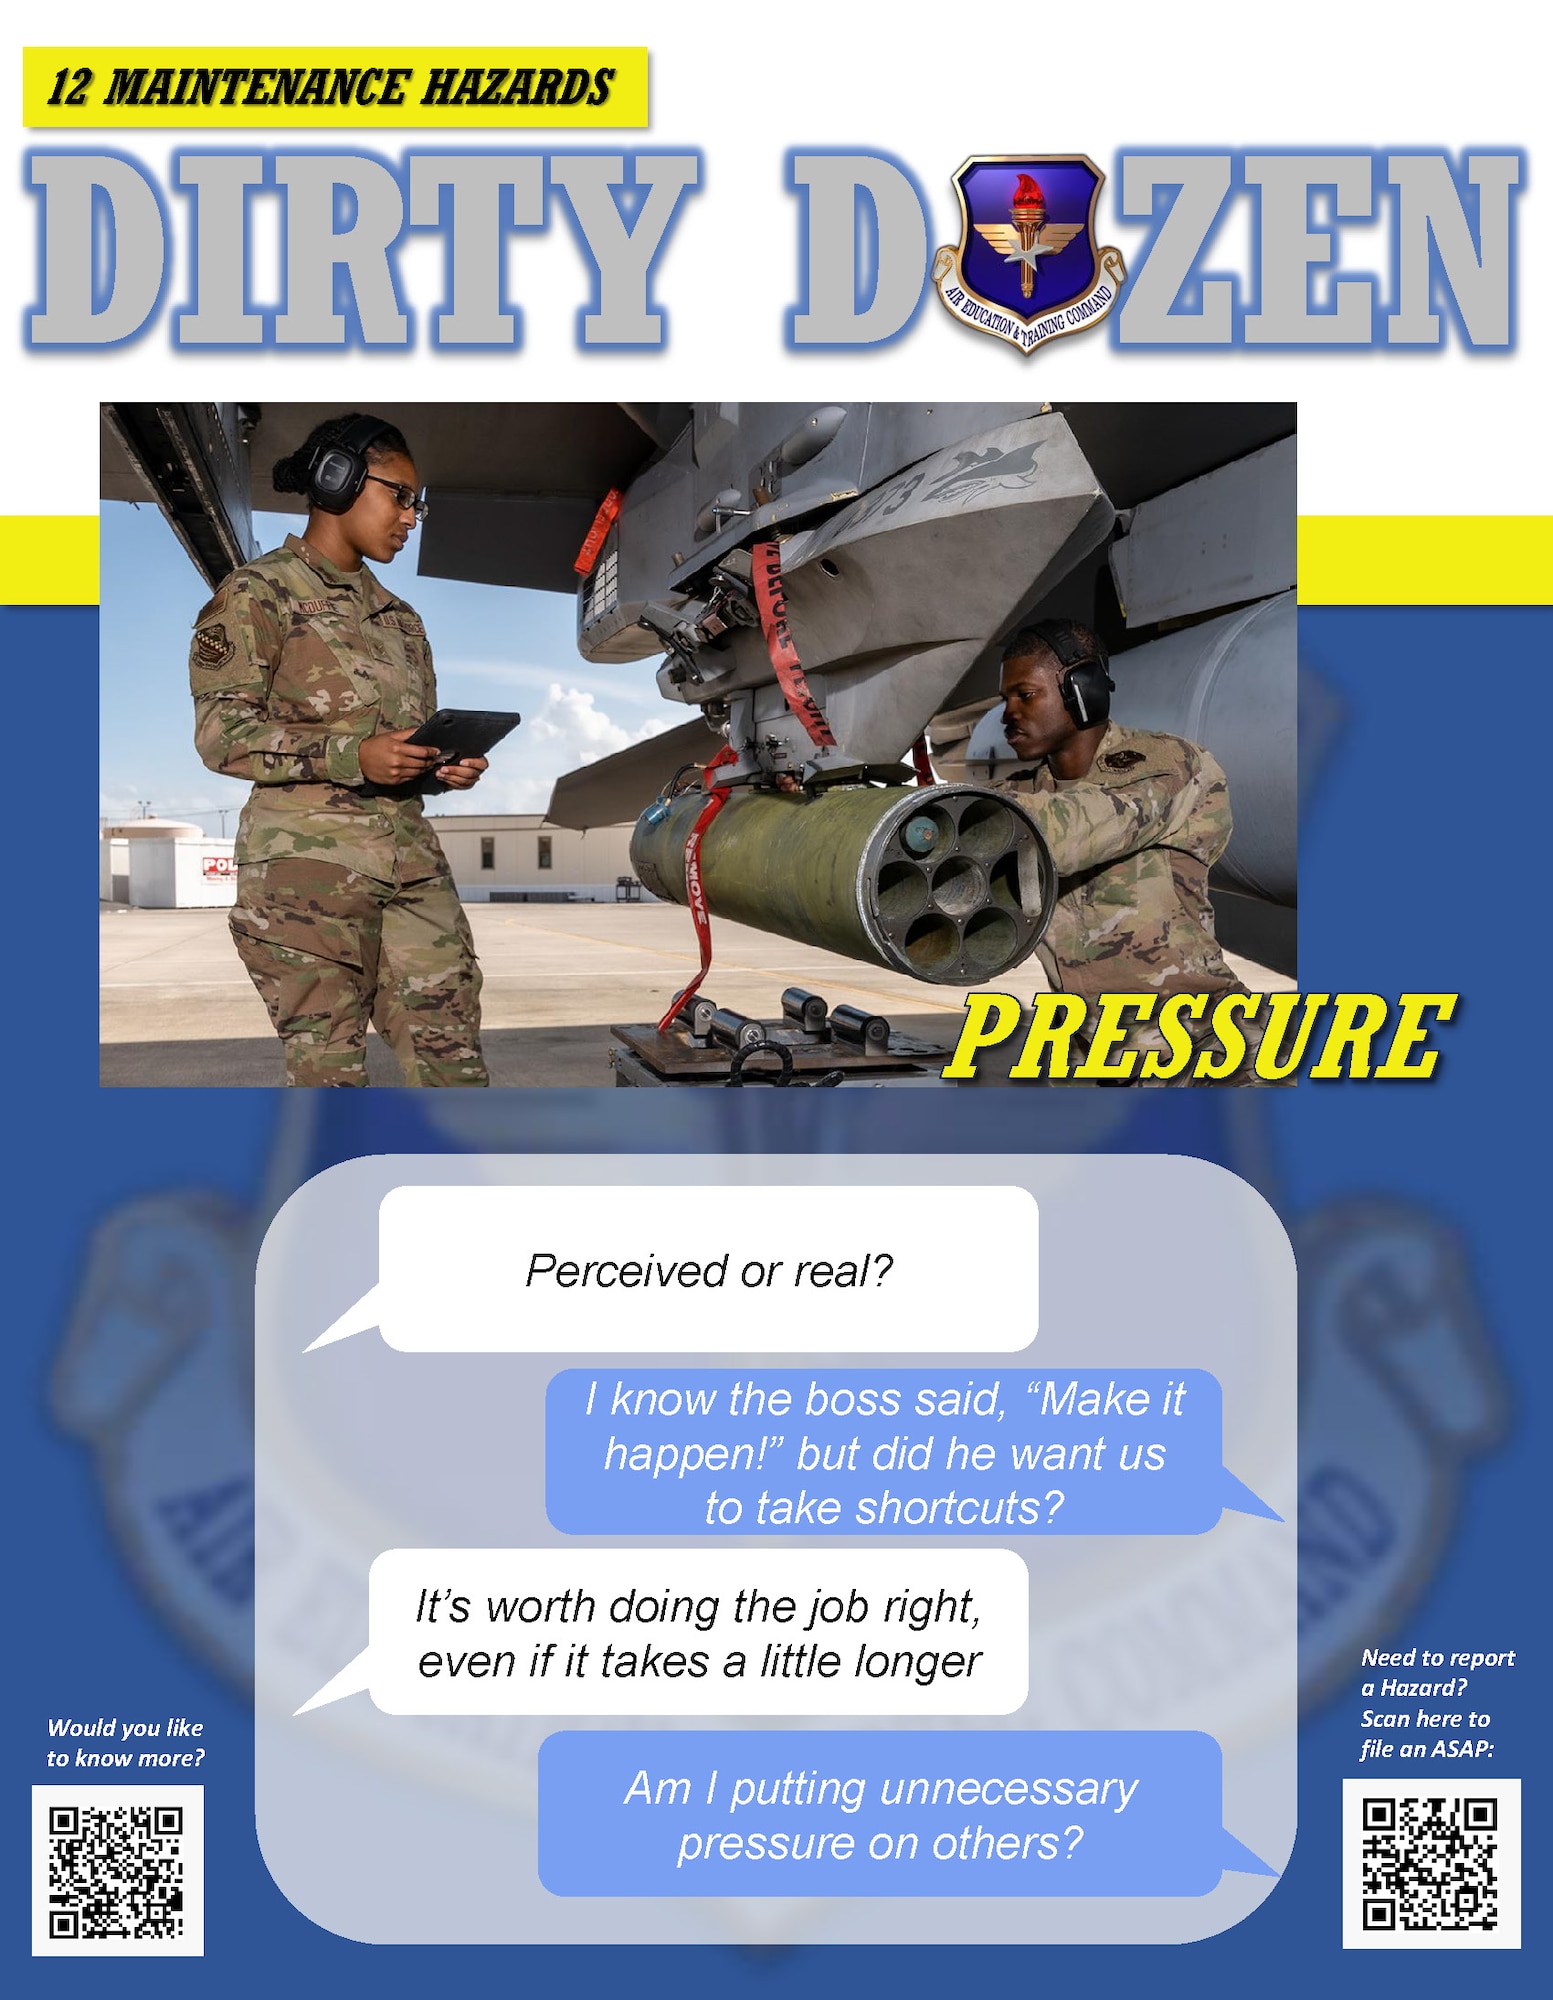 Pressure is one of the Dirty Dozen, which highlights common human error factors in aircraft maintenance mishaps.